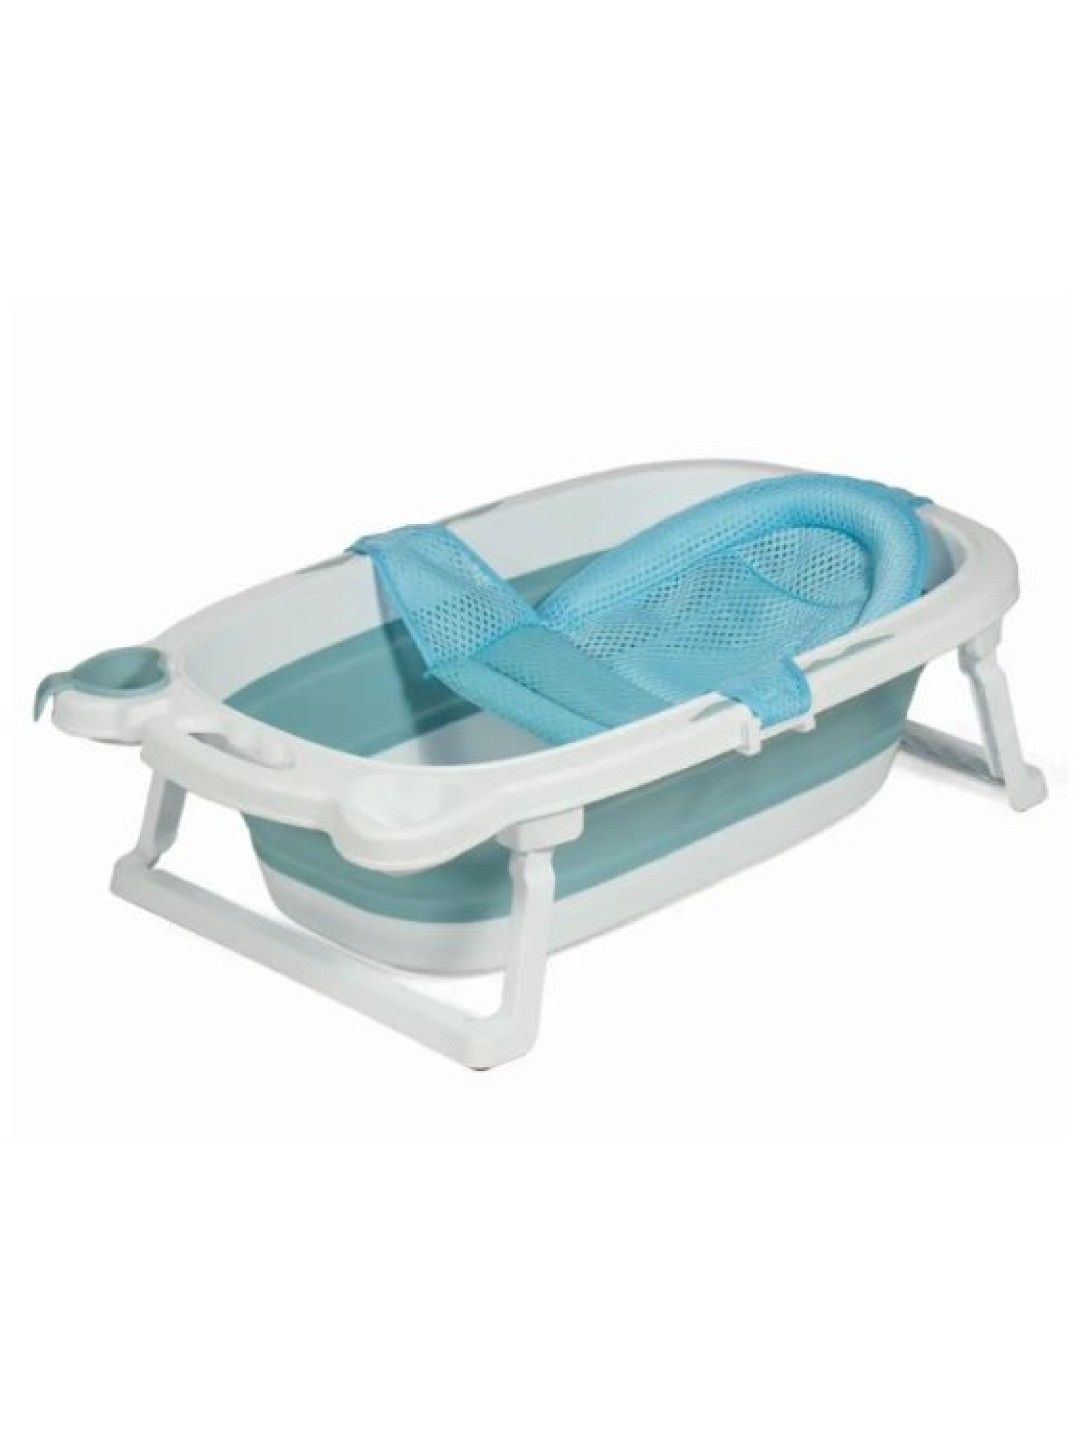 Juju Nursery Collapsible Baby to Toddler Bath Tub Set (Blue) (No Color- Image 2)